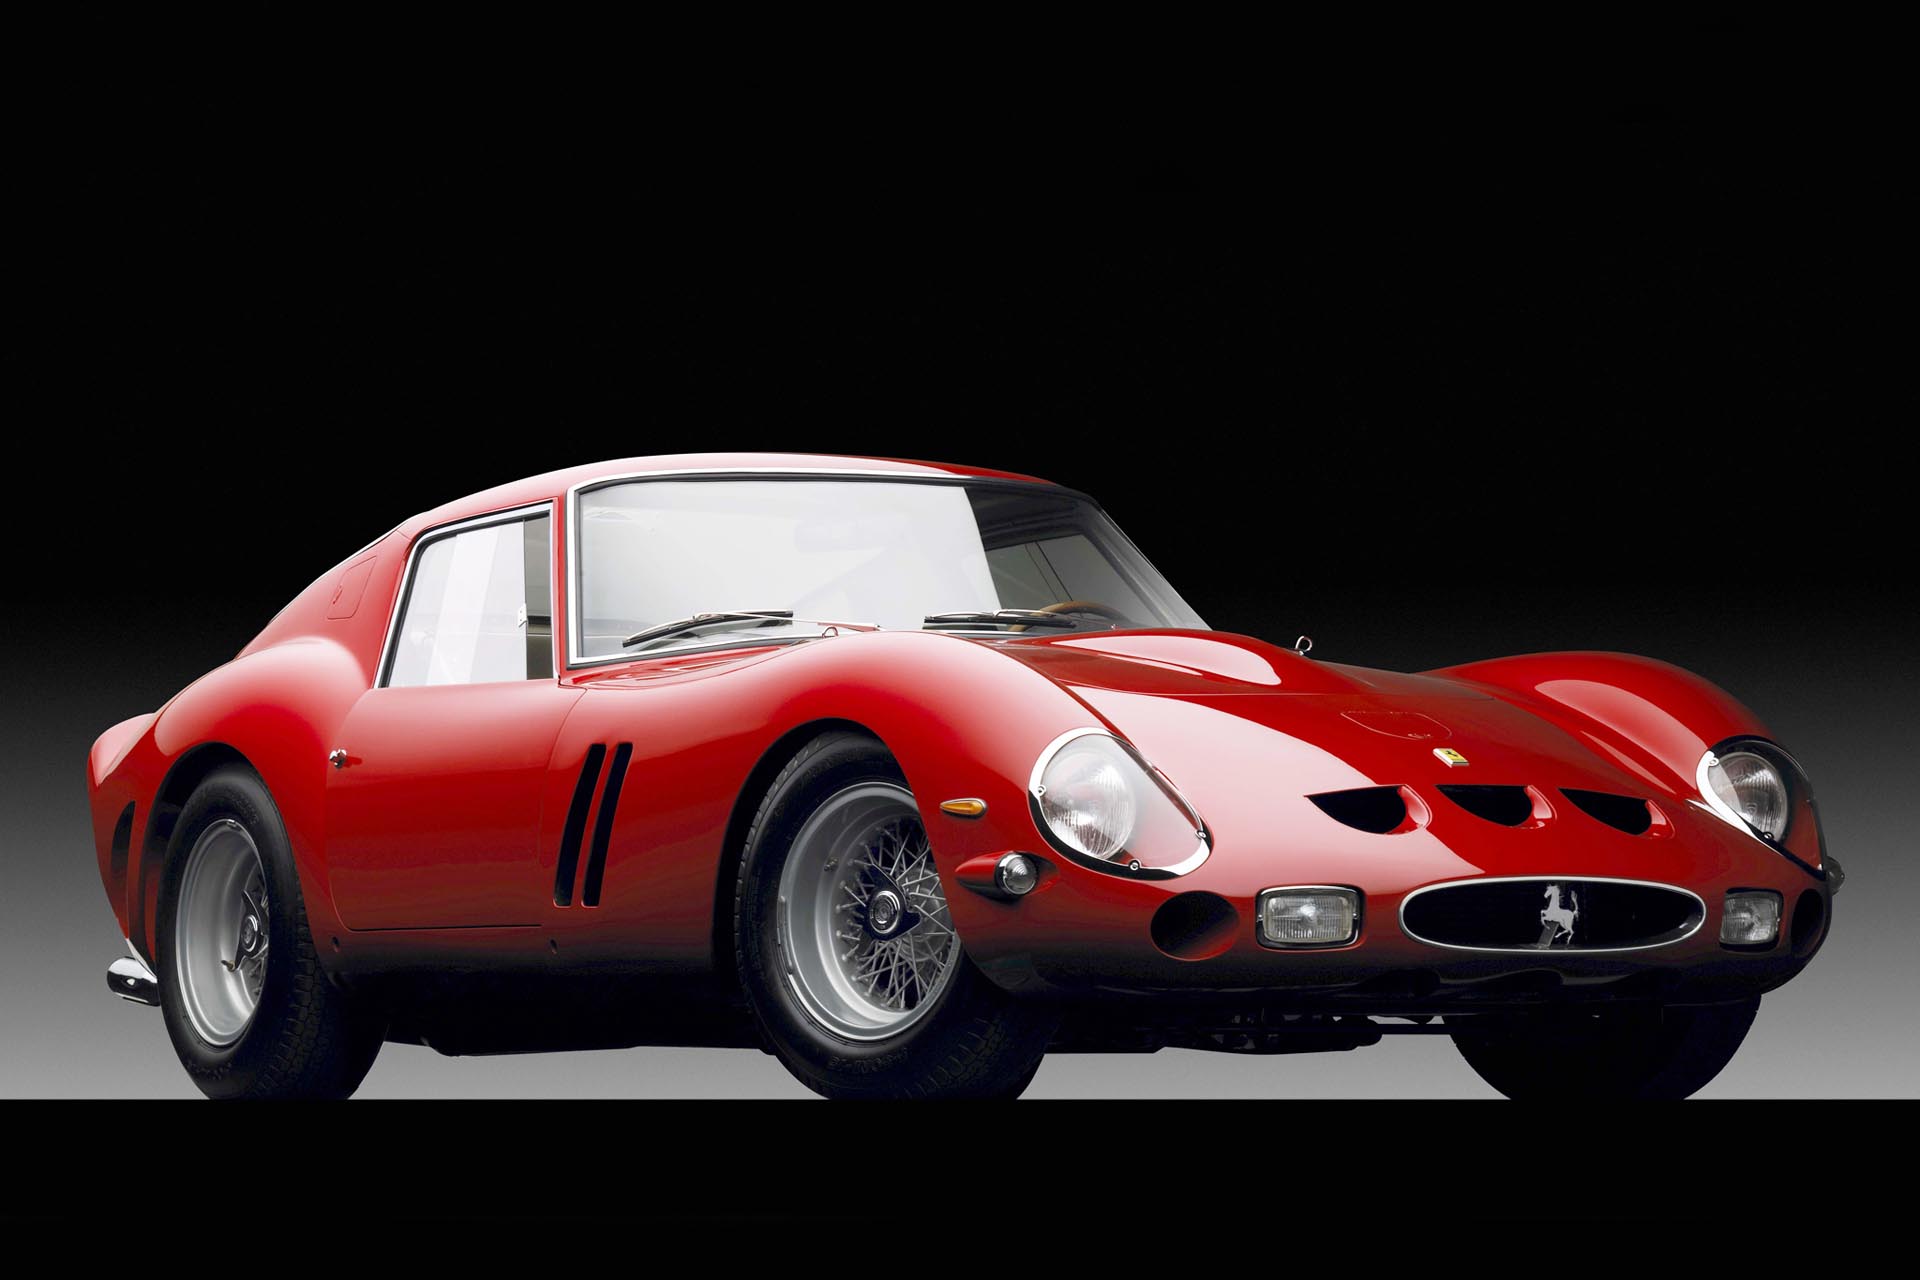 It is said that Enzo Ferrari cared only about racing, and sold road cars basically because he had to fund his competition models. The GTO, then, gets to be a blend of the best, a homologation special intended for racing, but certified for road use.